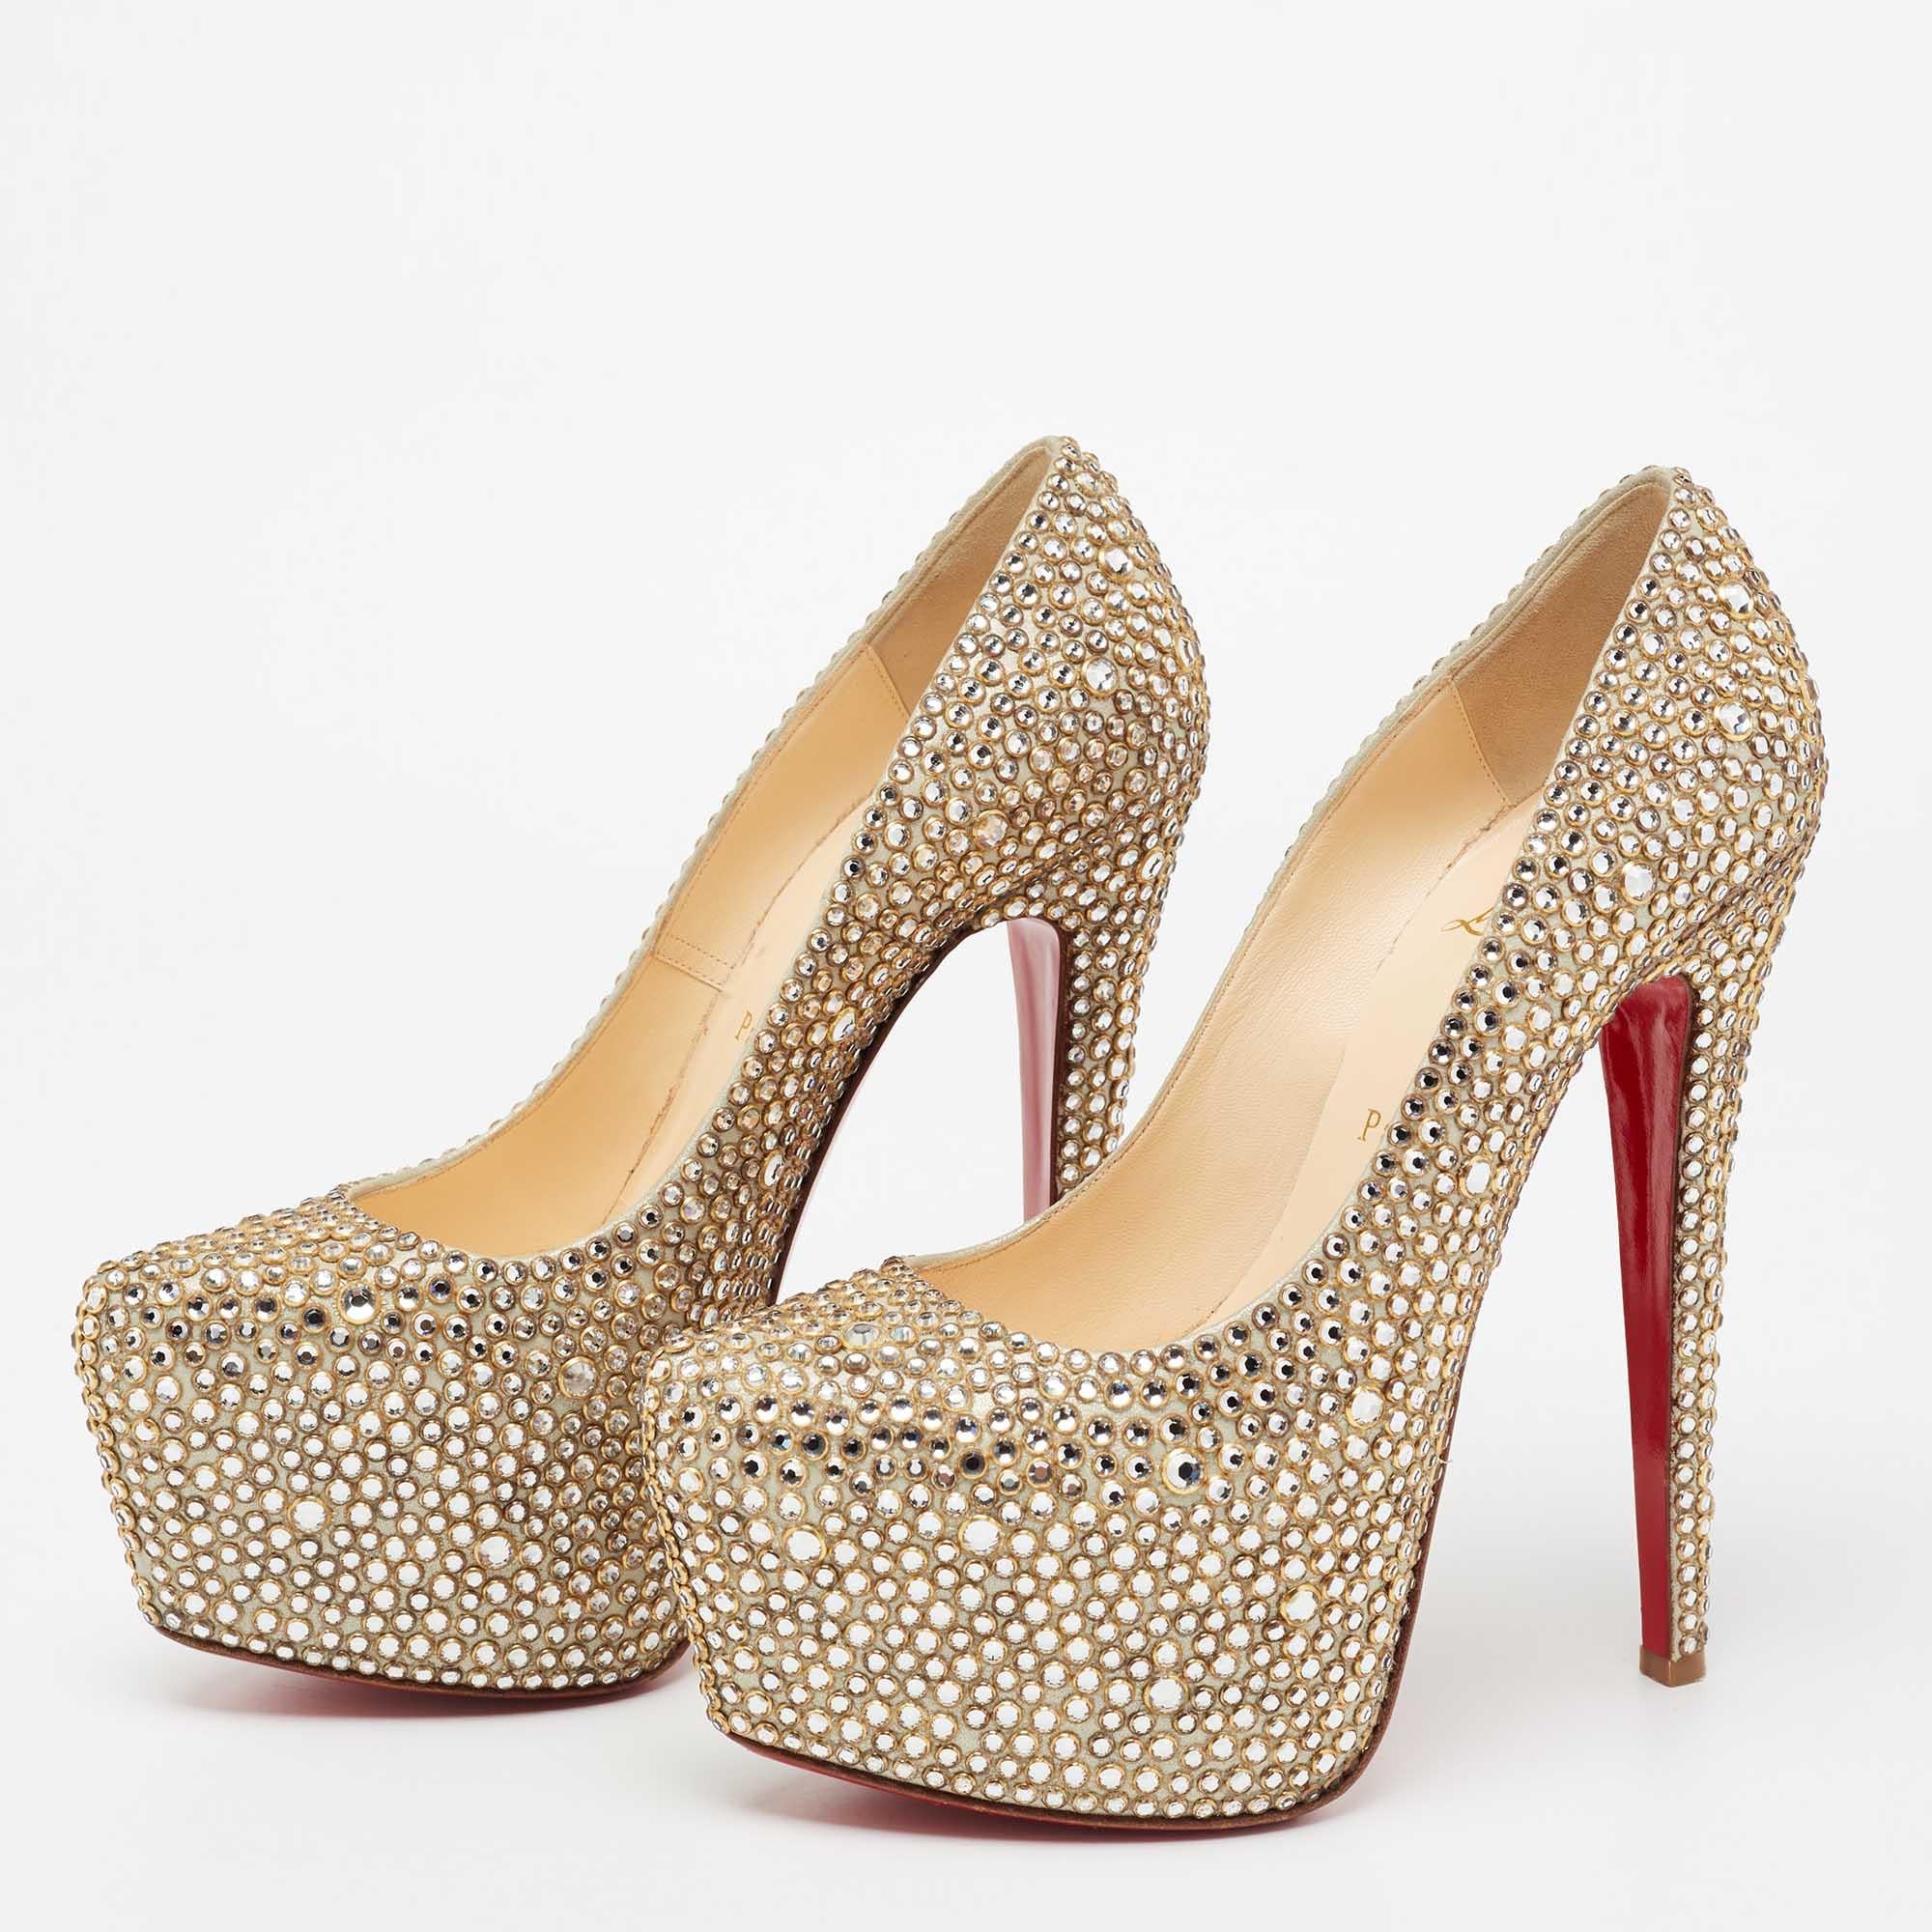 Christian Louboutin's timeless aesthetic and impeccable craftsmanship in shoemaking is evident in these statement pumps. Made from leather in a metallic gold shade and covered with crystals, the sleek cuts will accentuate the curve of your feet.